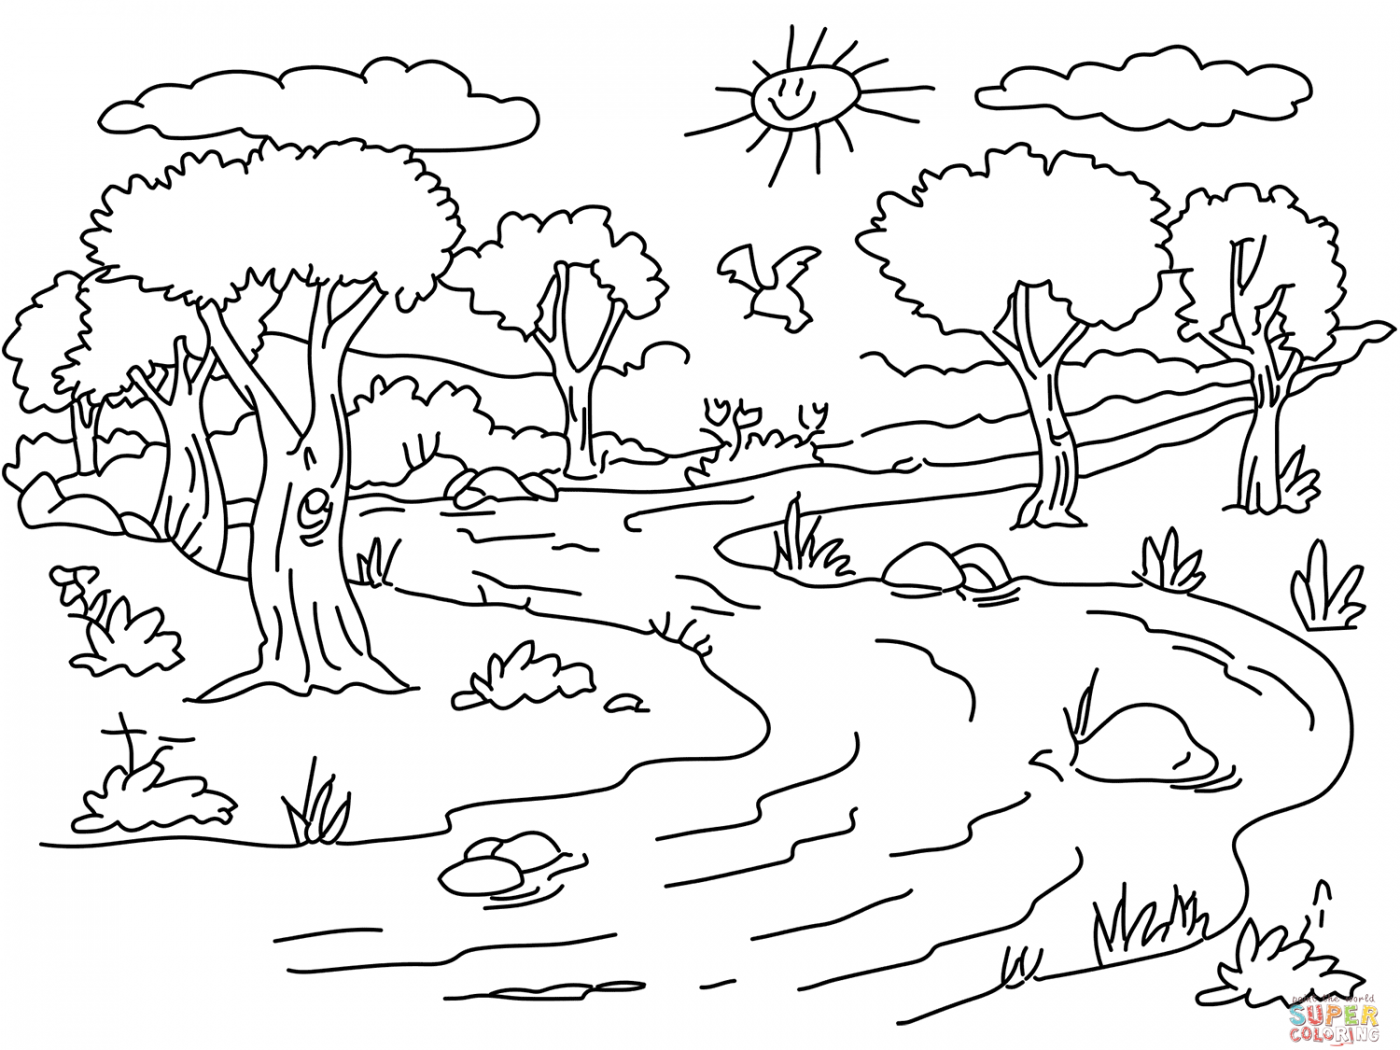 Realistic Landscape Coloring Pages at GetColorings.com | Free printable